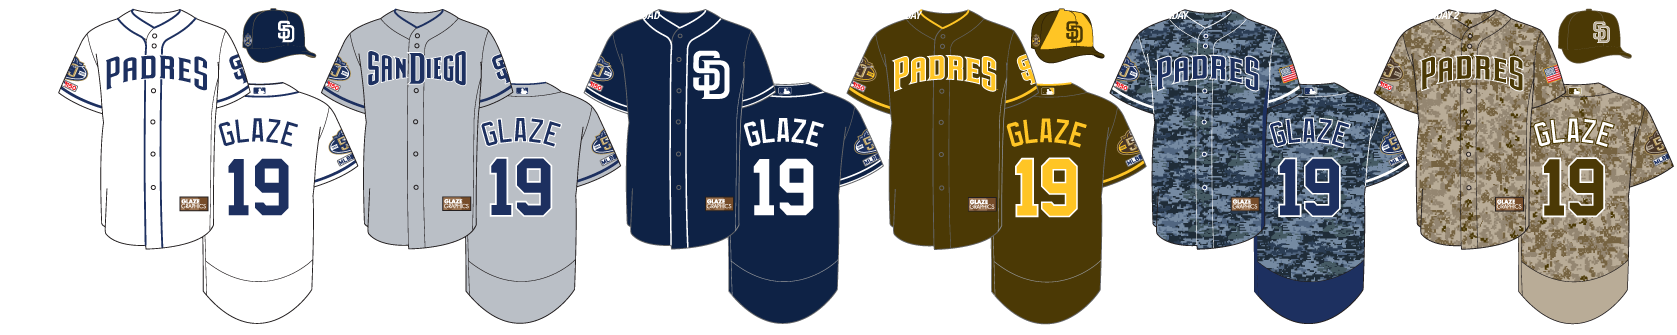 padres jerseys through the years